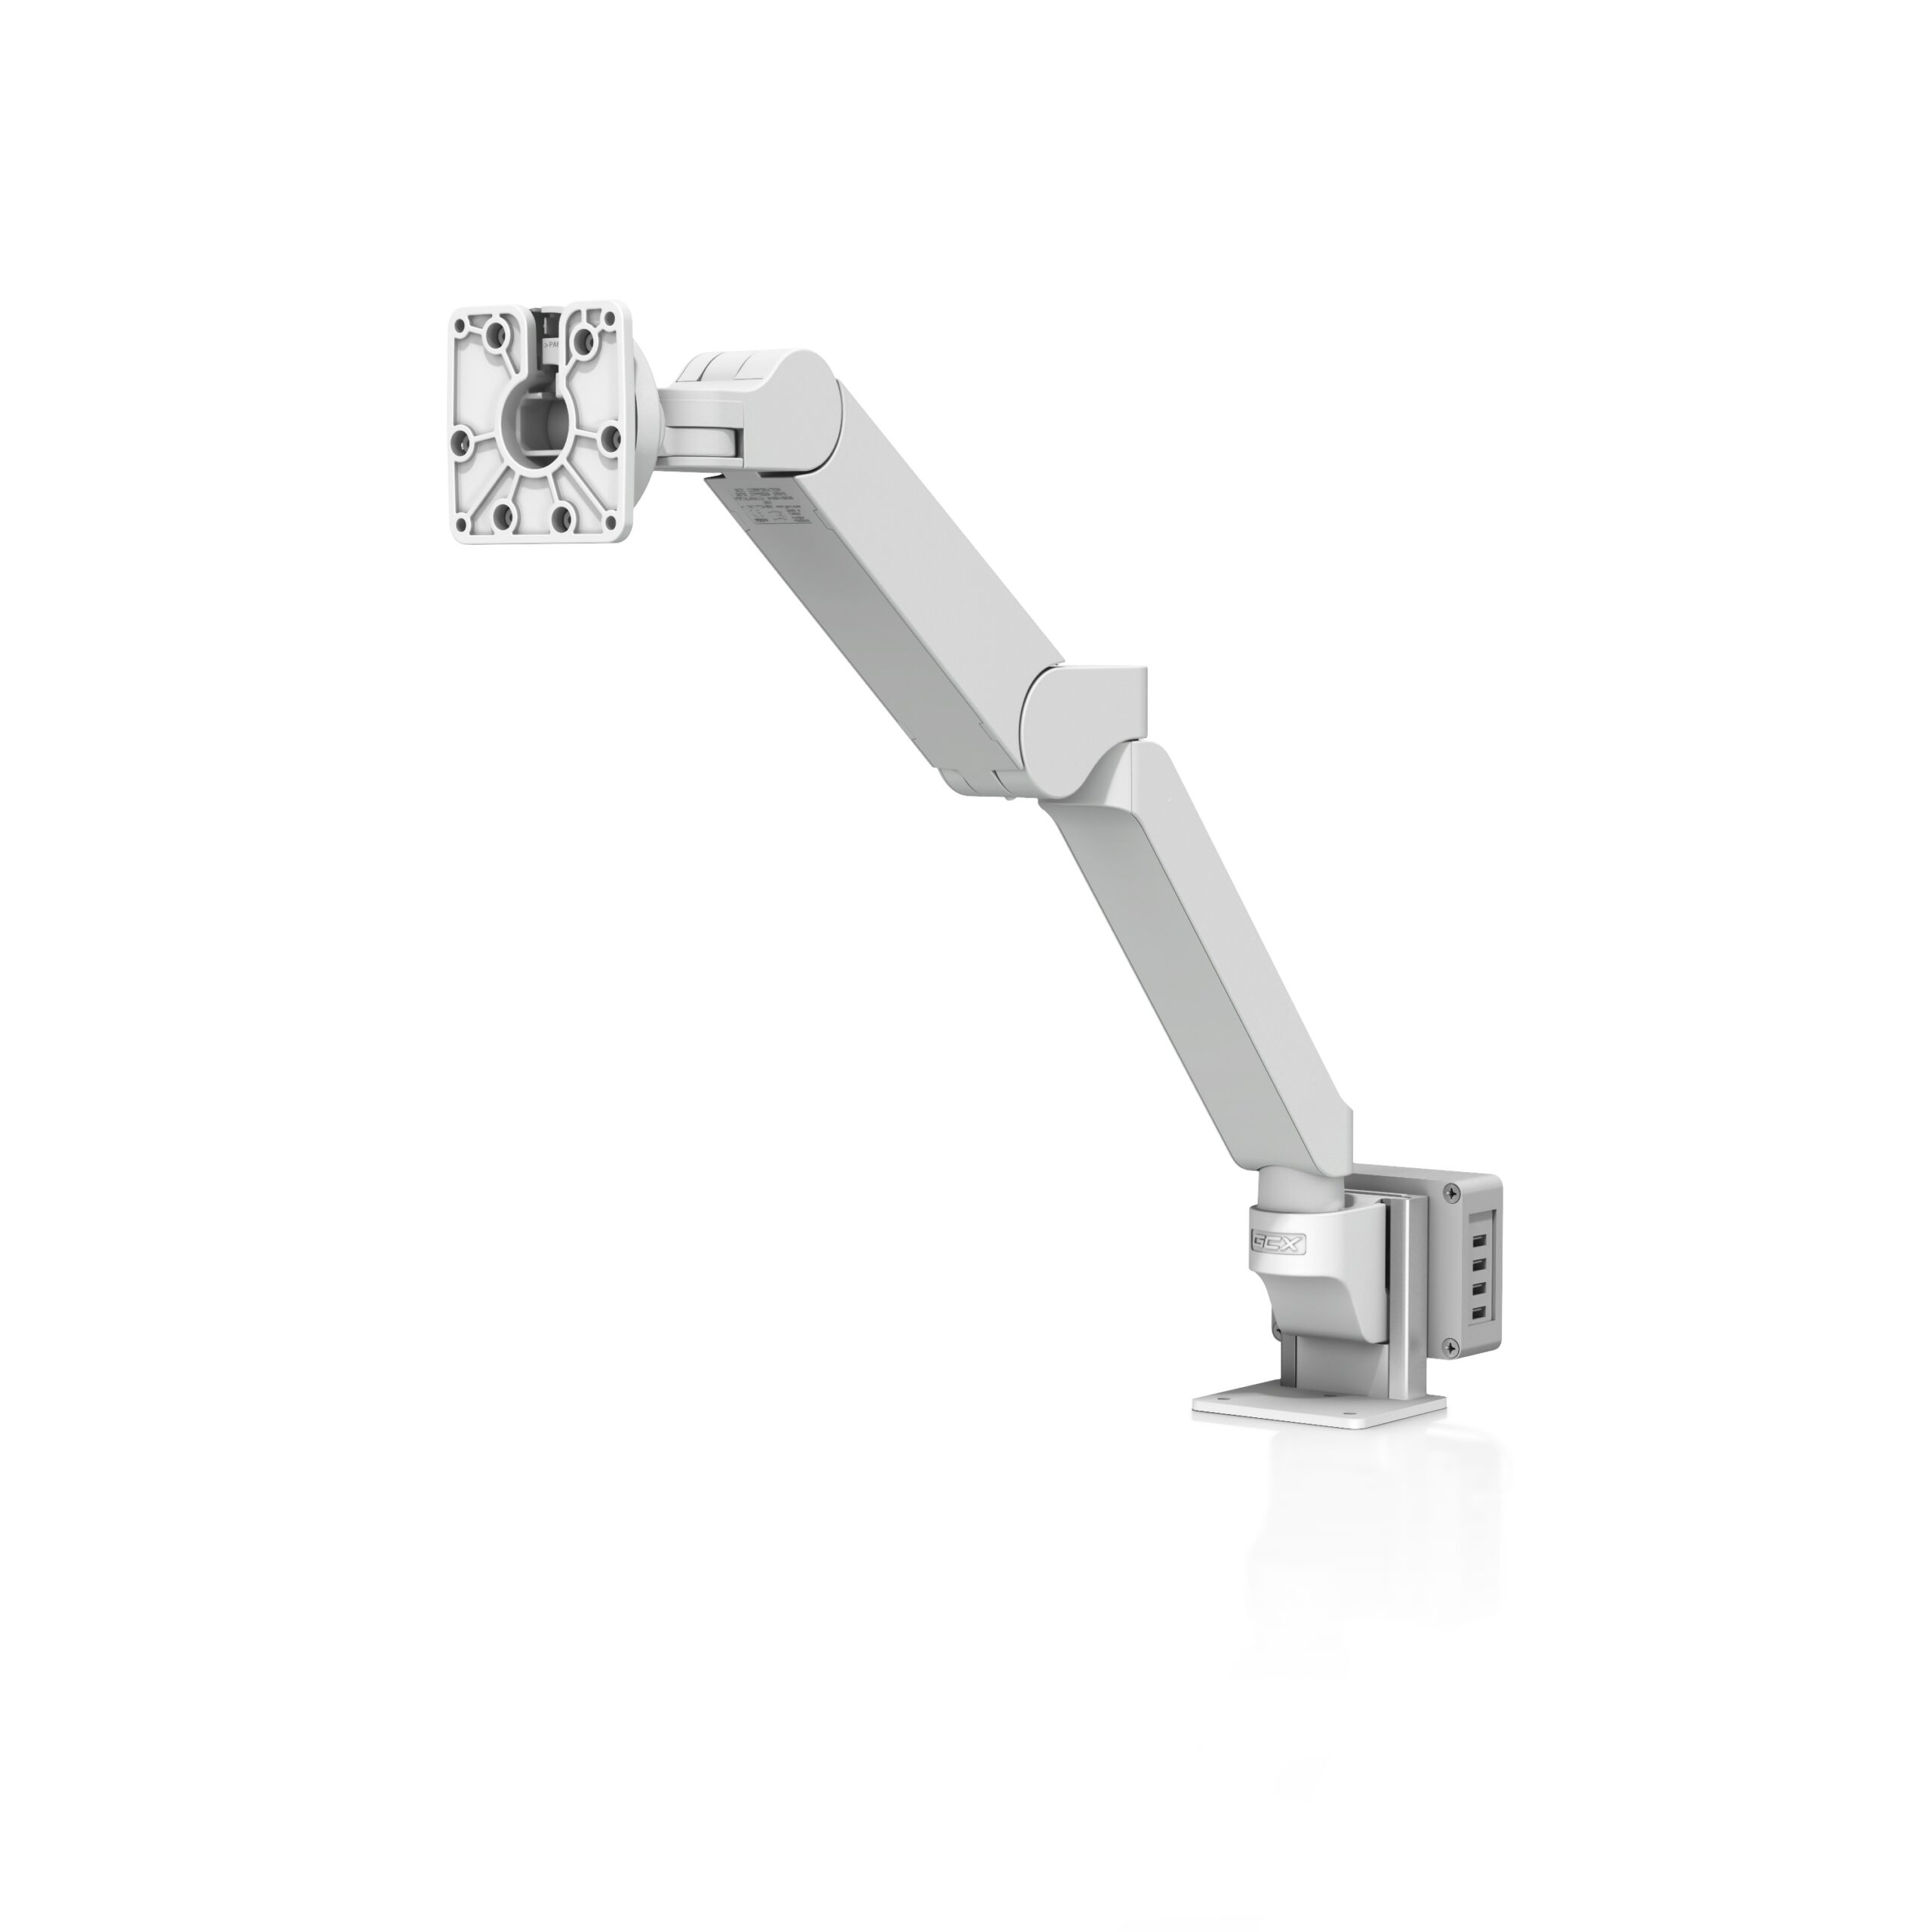 Countertop Mount for VHM-T Variable Height Arm for Tablets with Extension and USB Hub Unloaded